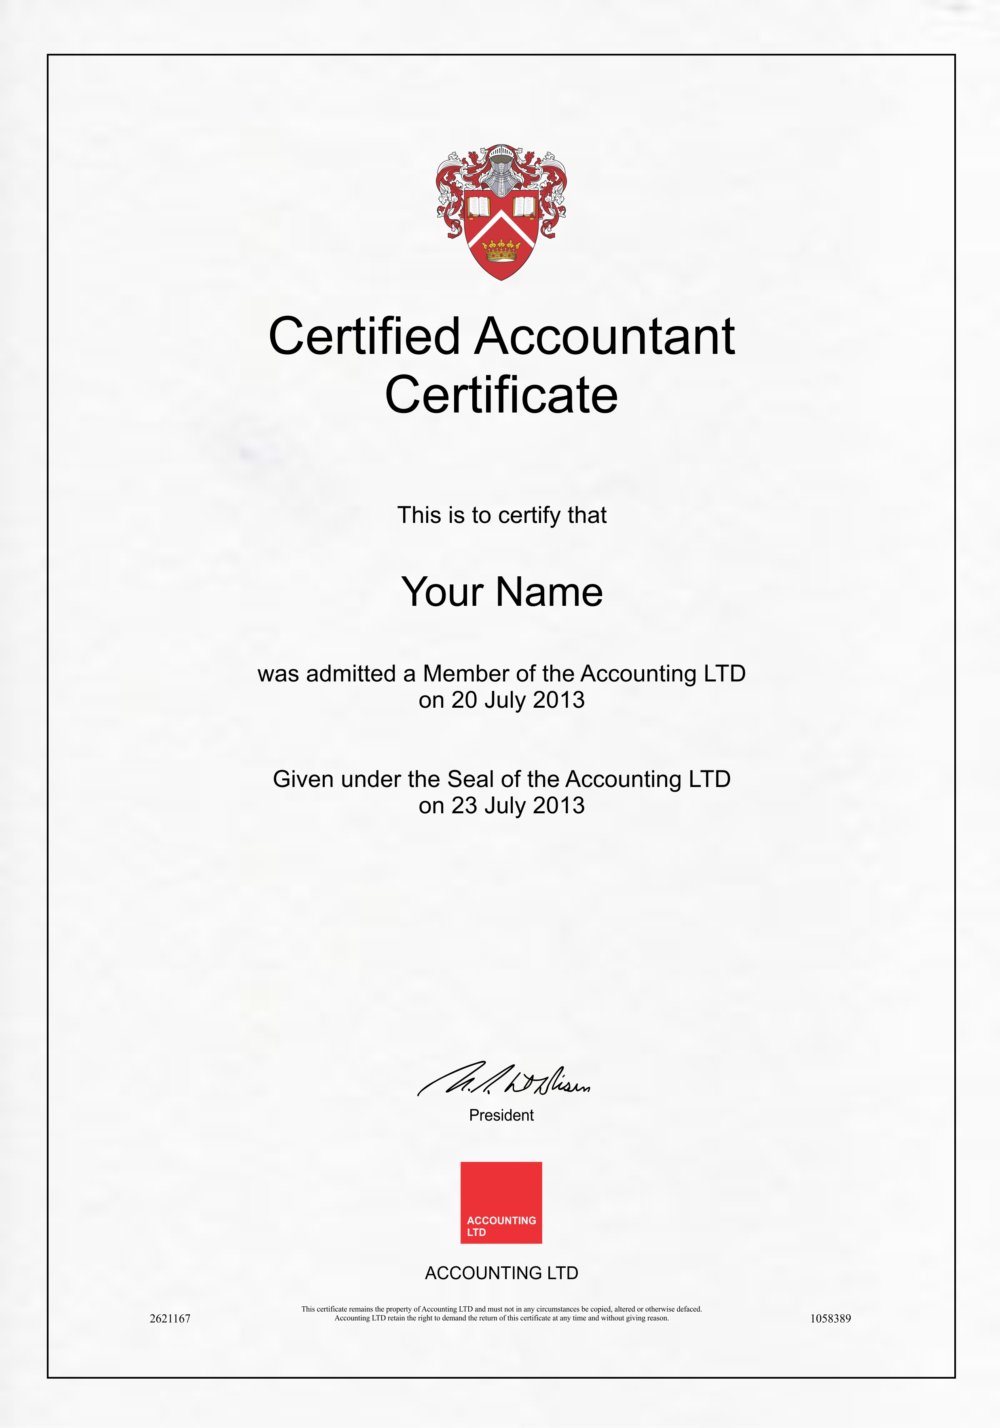 Fake Accounting Certificate 1 Diploma Outlet